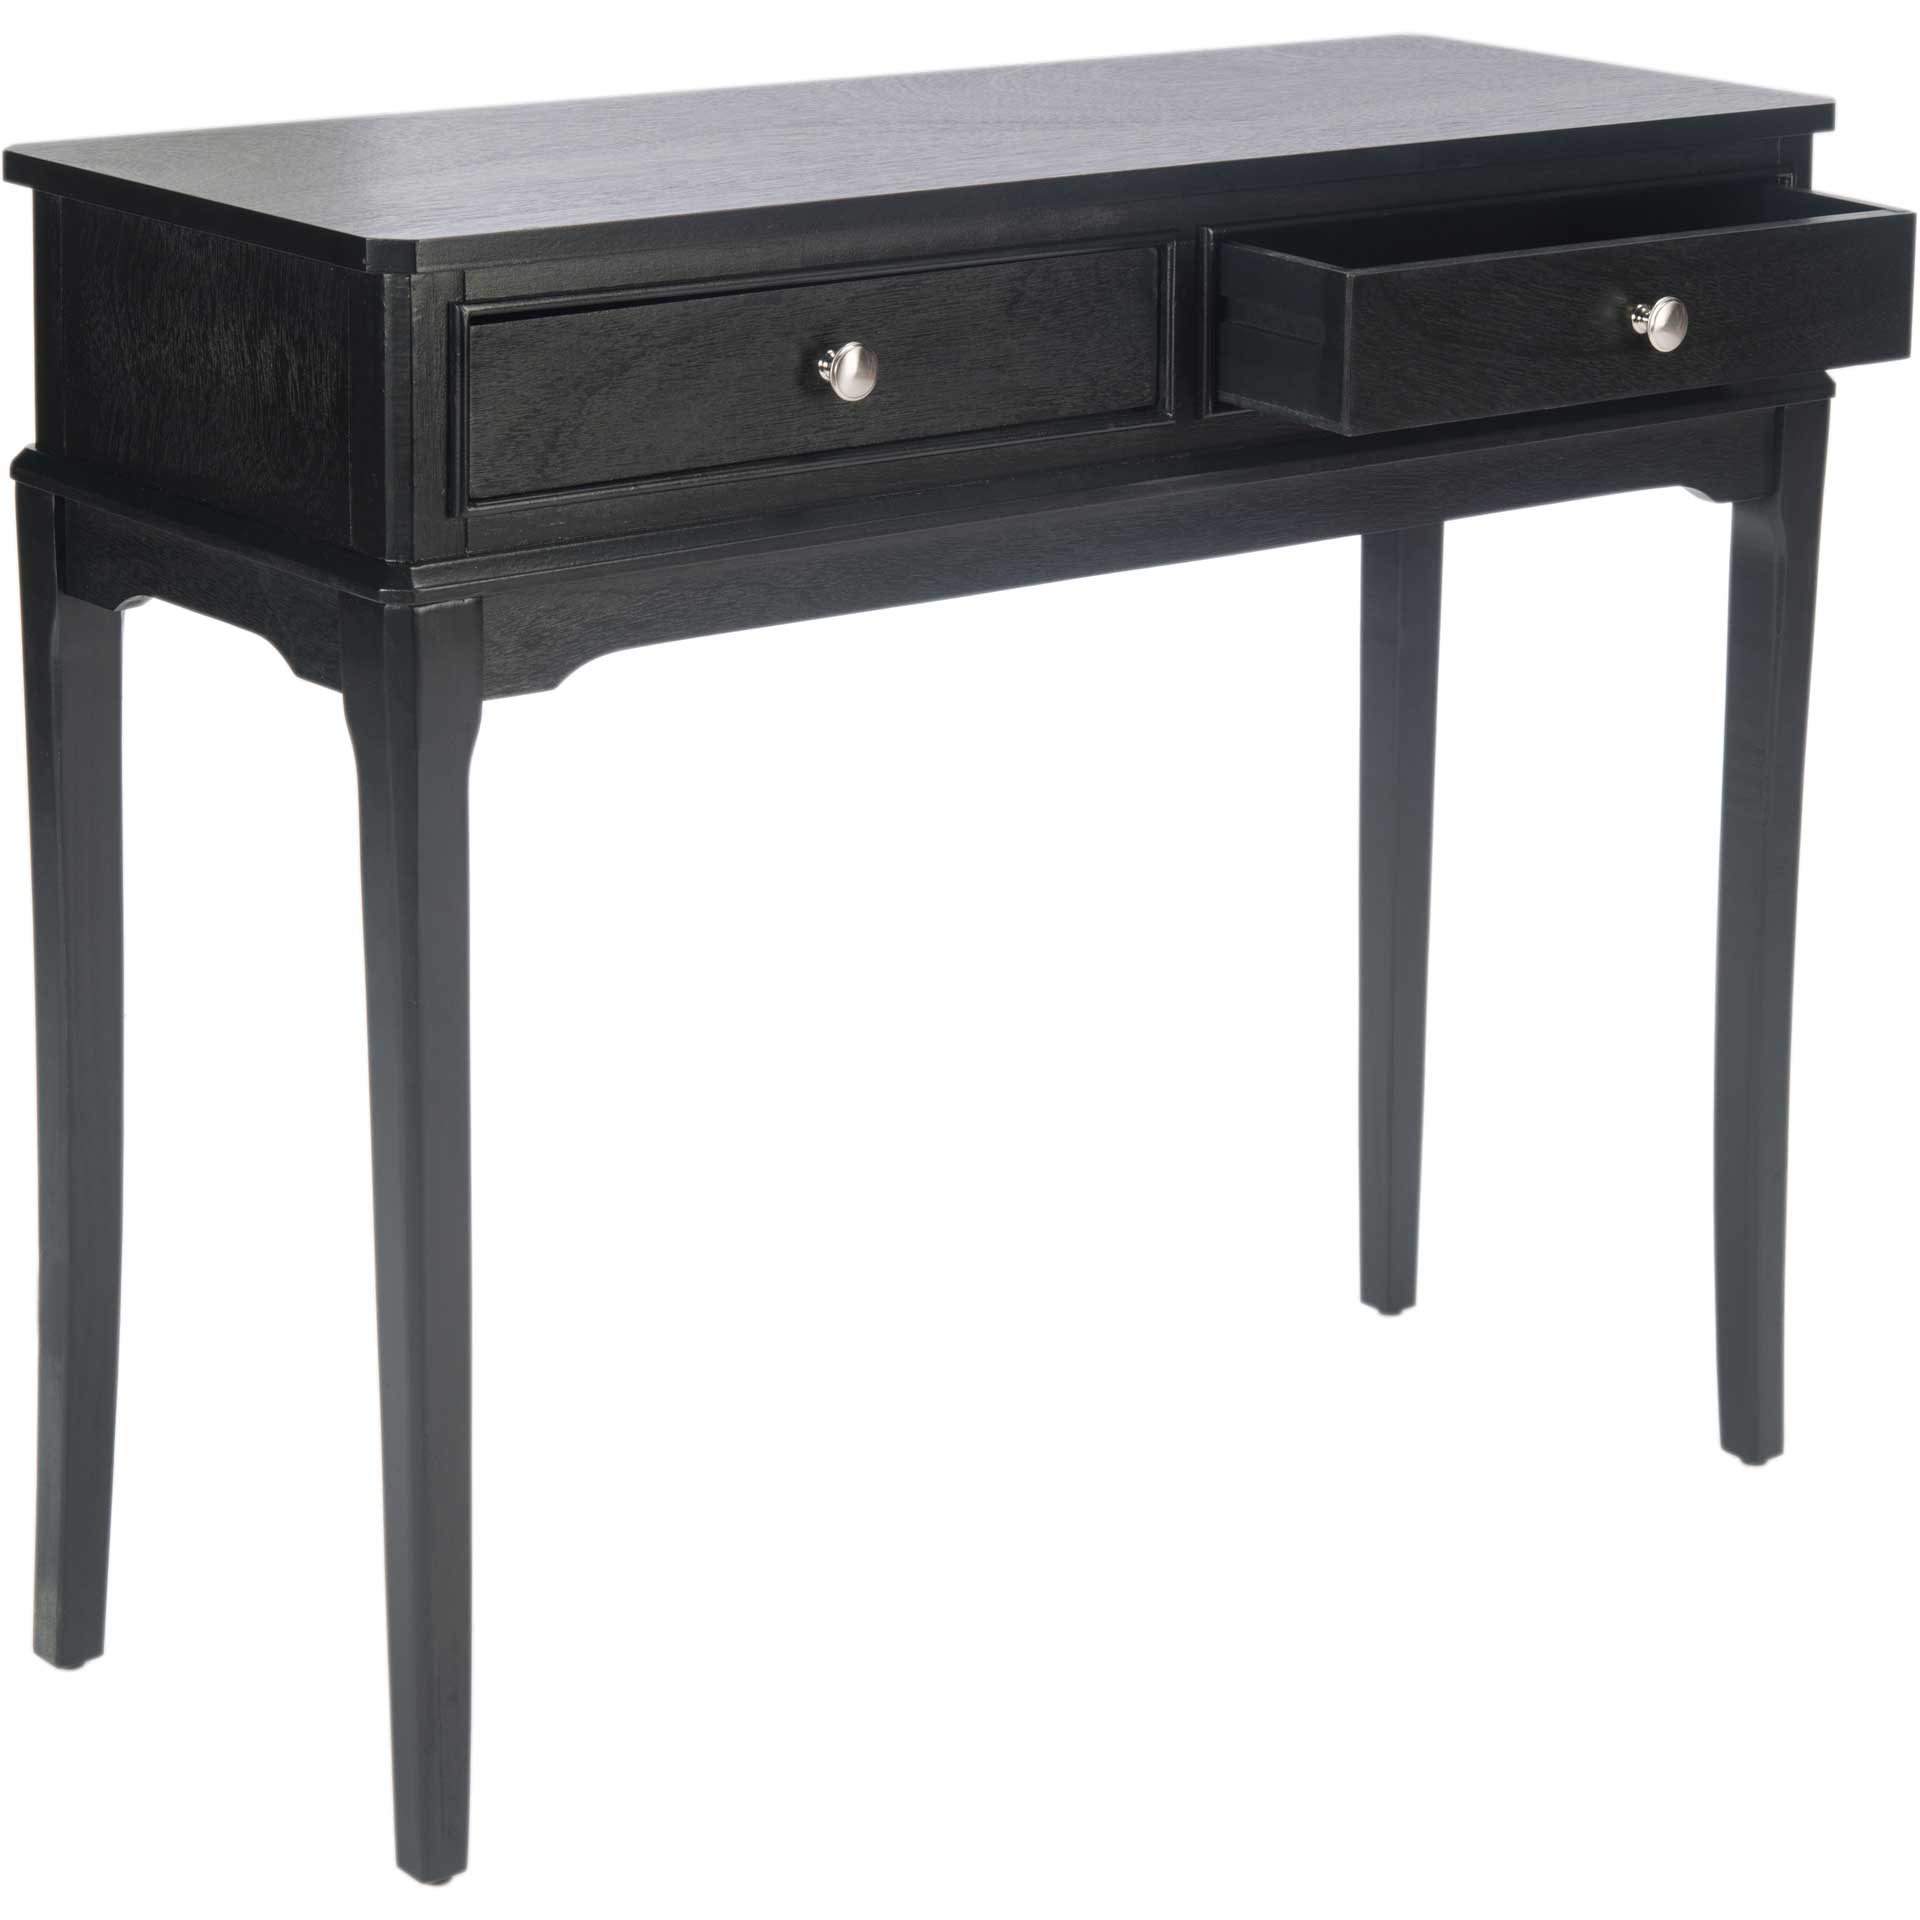 Ophelia 2 Drawer Console Table Black